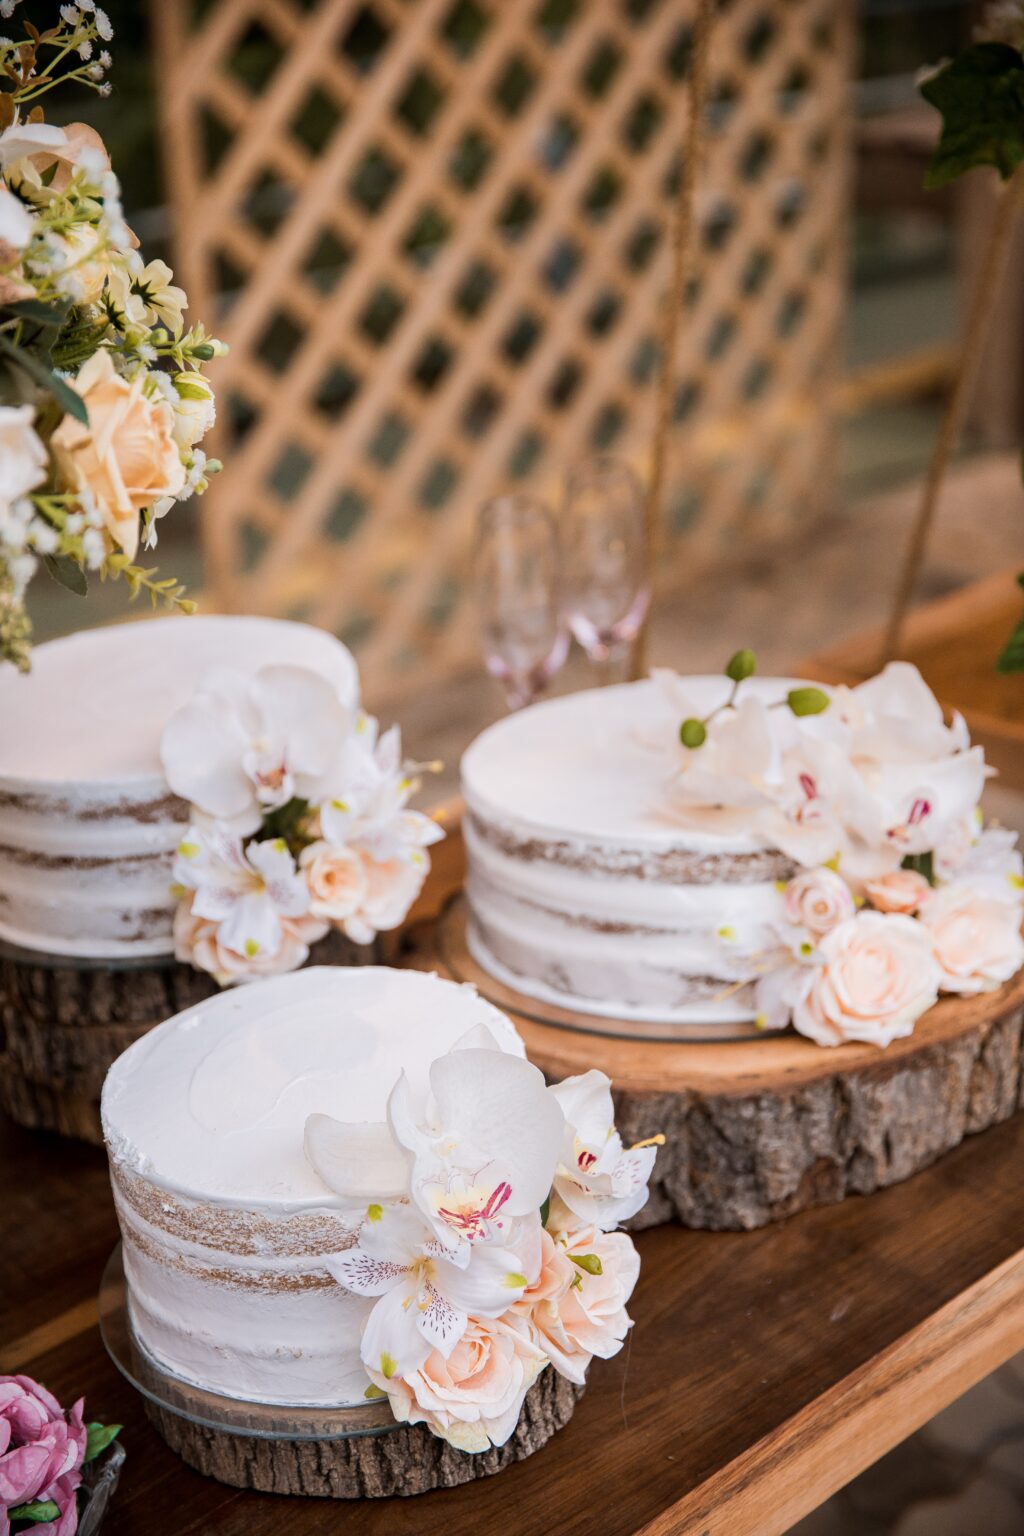 4 Unique Tips for a Vintage Wedding That Will Wow Your Guests